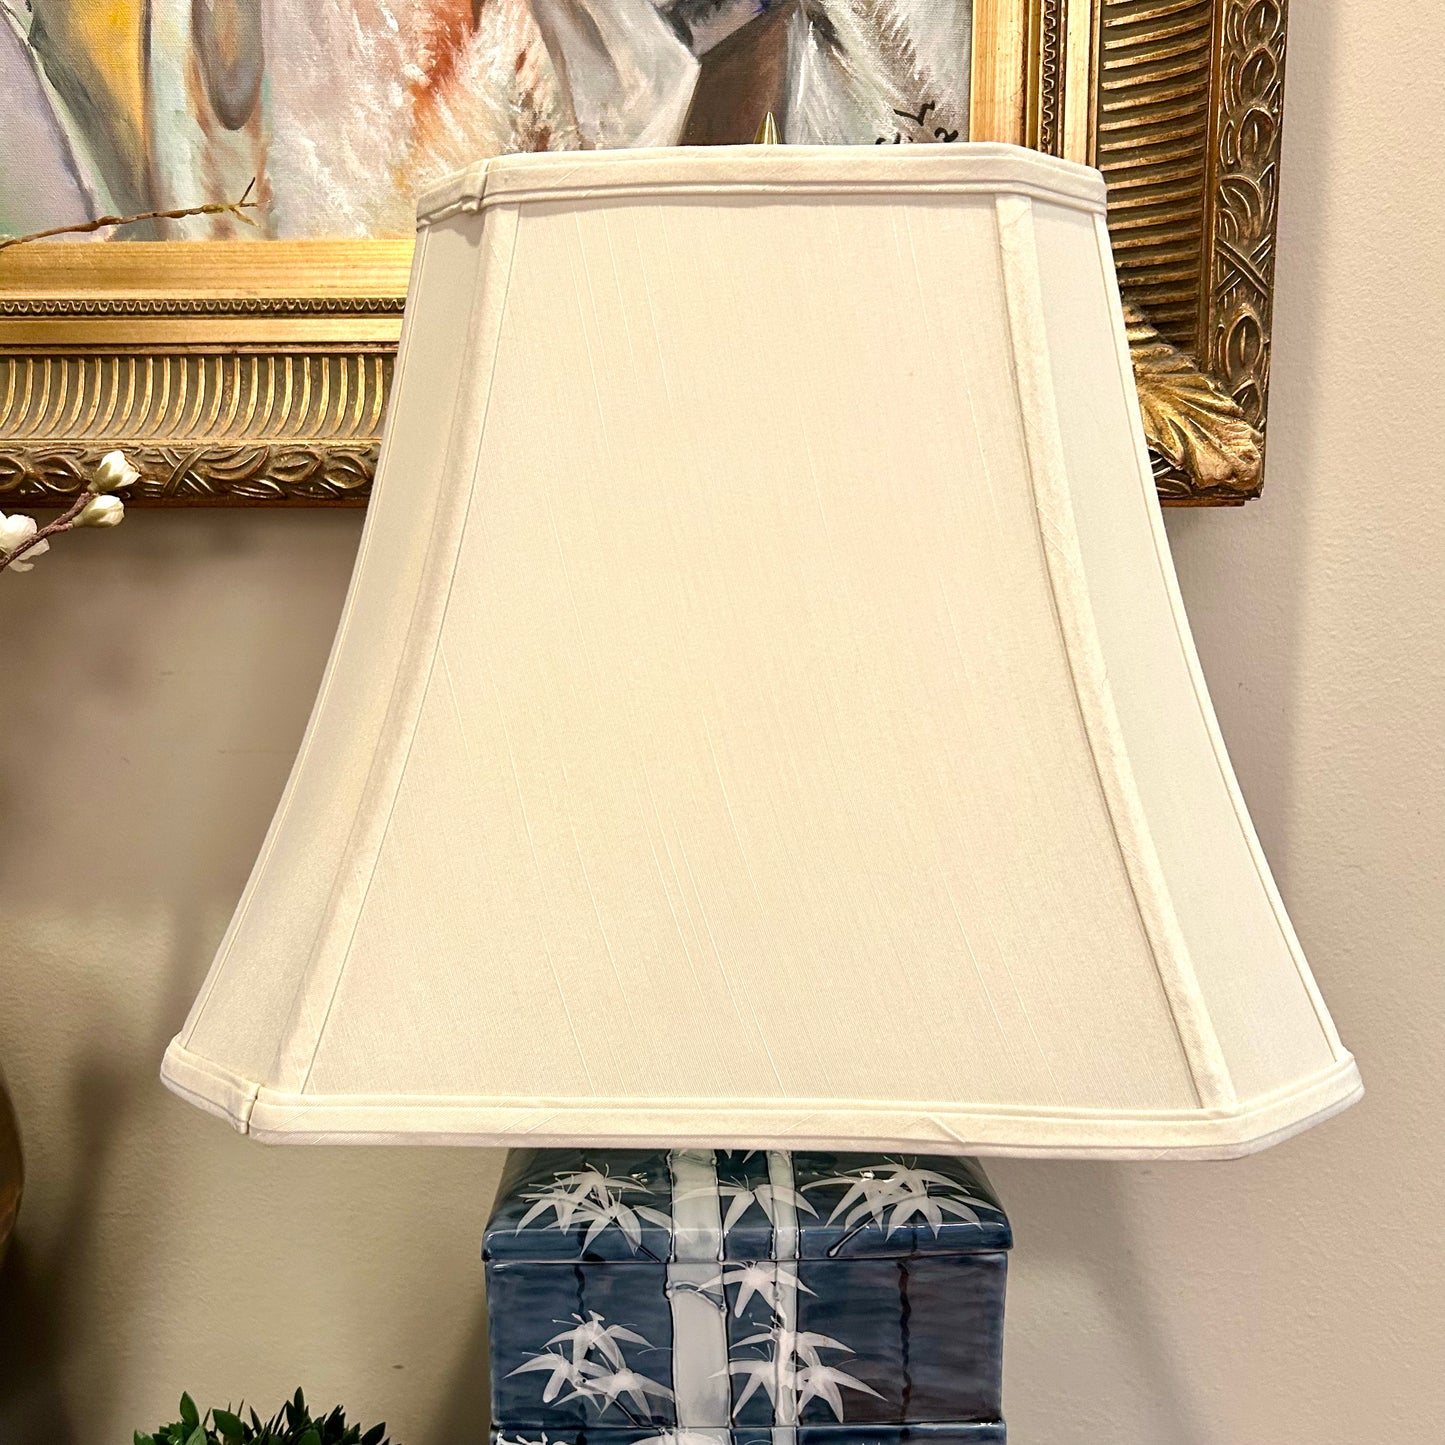 Fabulous vintage chinoiserie blue and white faux bamboo  lamp.